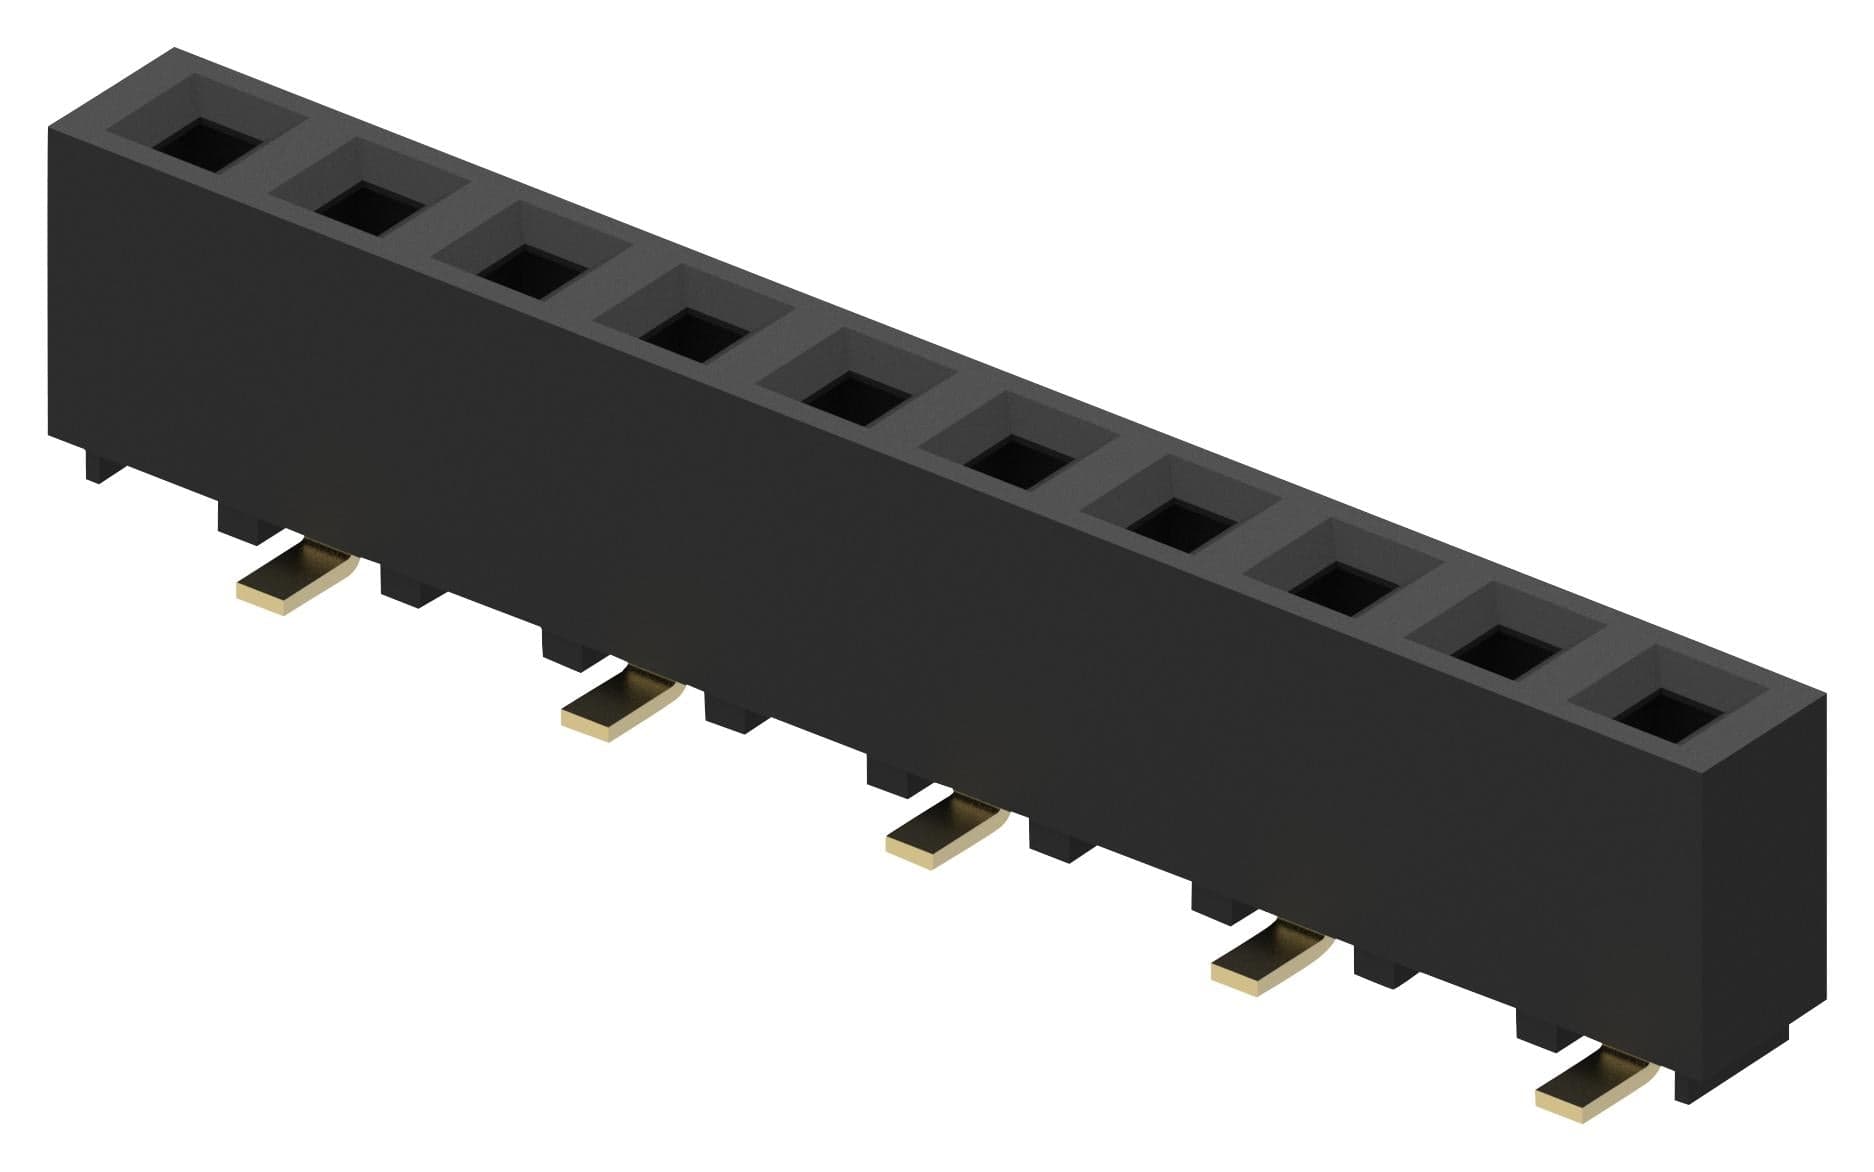 GCT (GLOBAL CONNECTOR TECHNOLOGY) Board-to-Board BG125-05-A-1-1-0440-N-D CONNECTOR, RCPT, 5POS, 1ROW, 2.54MM GCT (GLOBAL CONNECTOR TECHNOLOGY) 2577328 BG125-05-A-1-1-0440-N-D